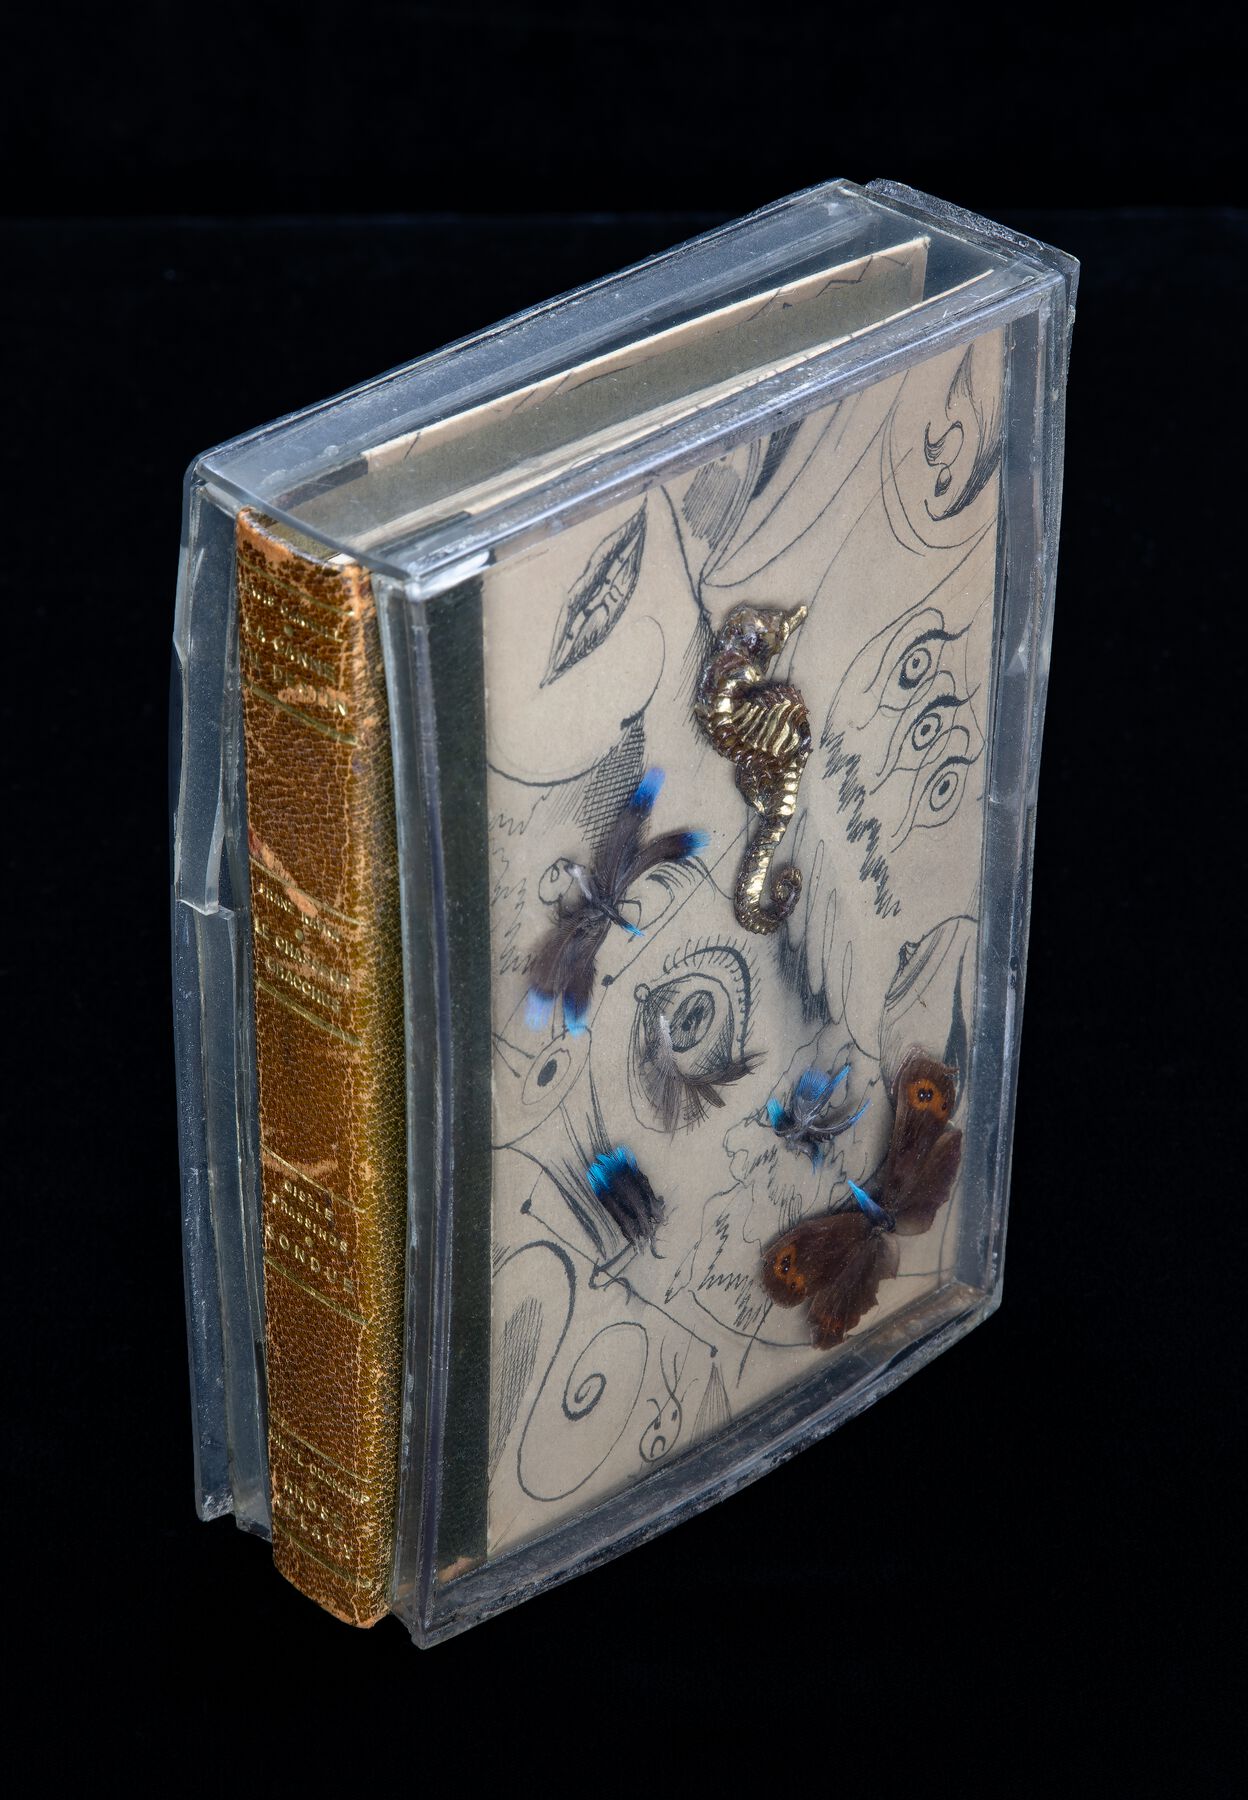 A book with thick blue edges with a spine of an antique book, displaying a 3-D seahore and 4 insects on top of a cover with drawings